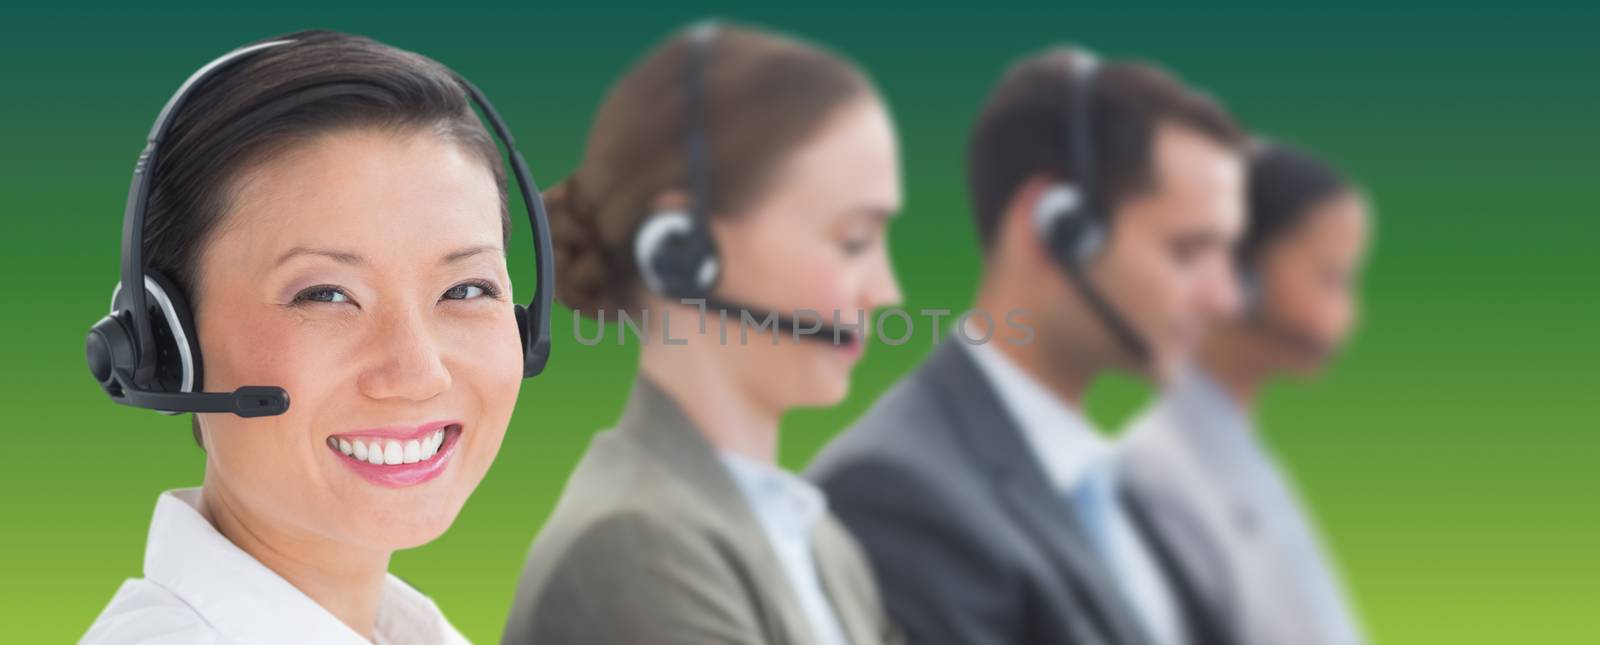 Composite image of business people with headsets using computers  by Wavebreakmedia